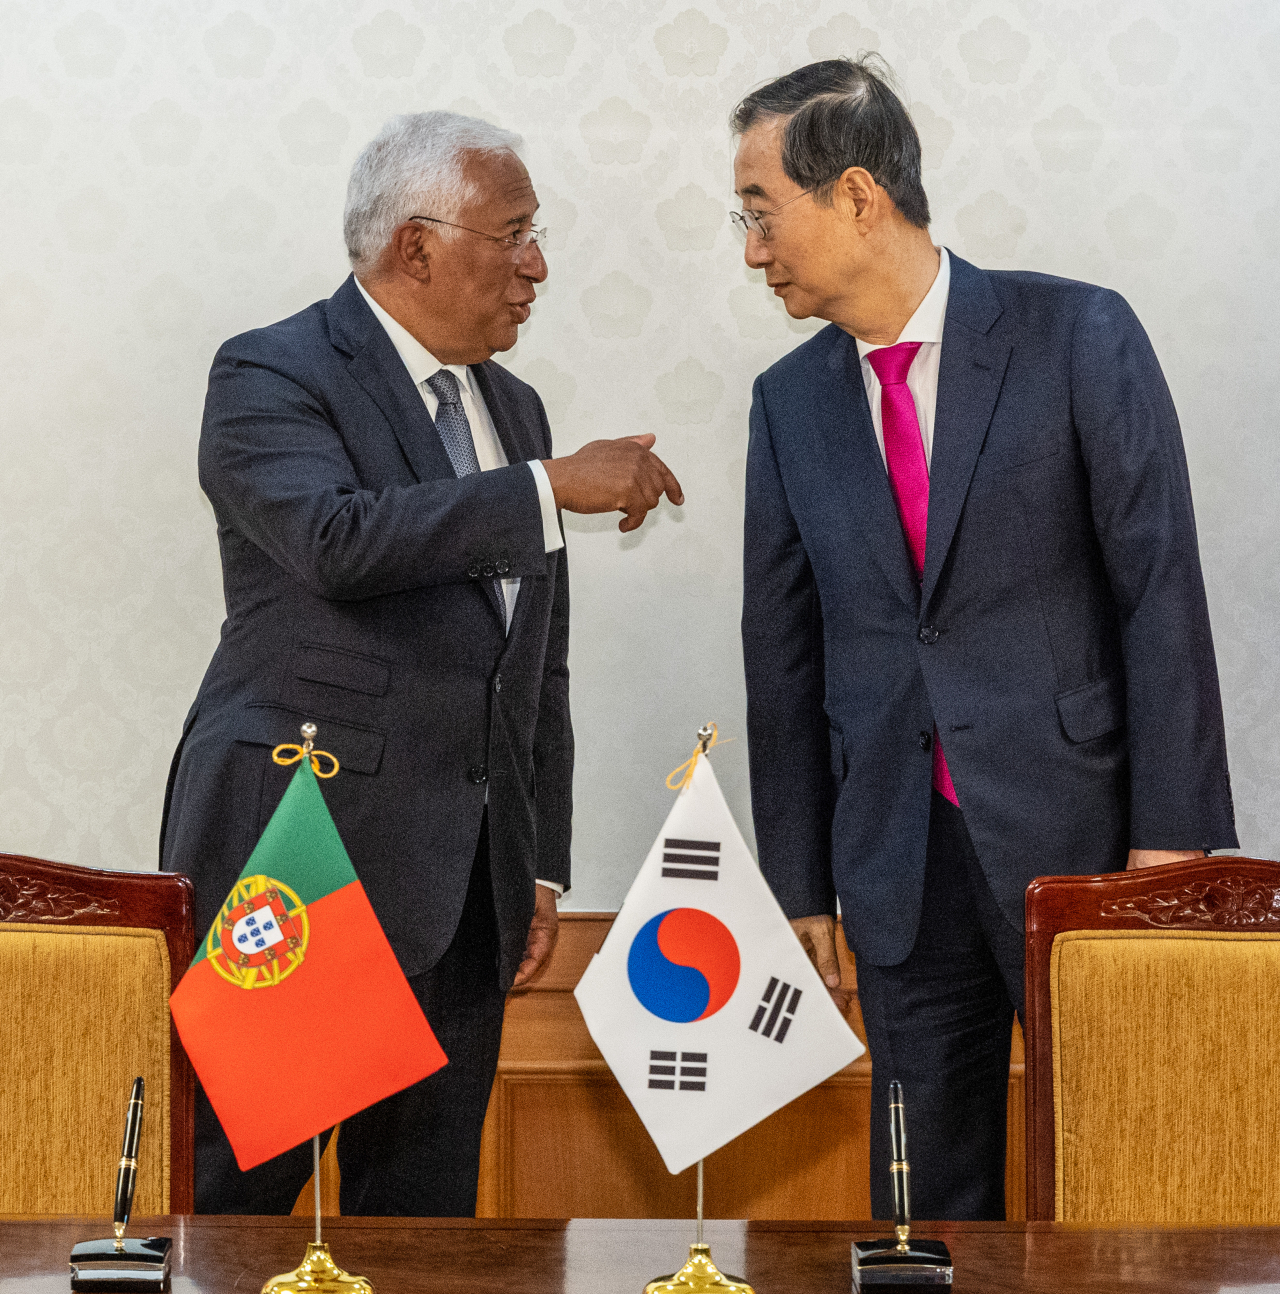 Portugal's Prime Minister Antonio Costa (left) and South Korea's Prime Minister Han Duck-soo are seen exchanging words during talks held at the Government Complex Seoul on Wednesday. (Yonhap)